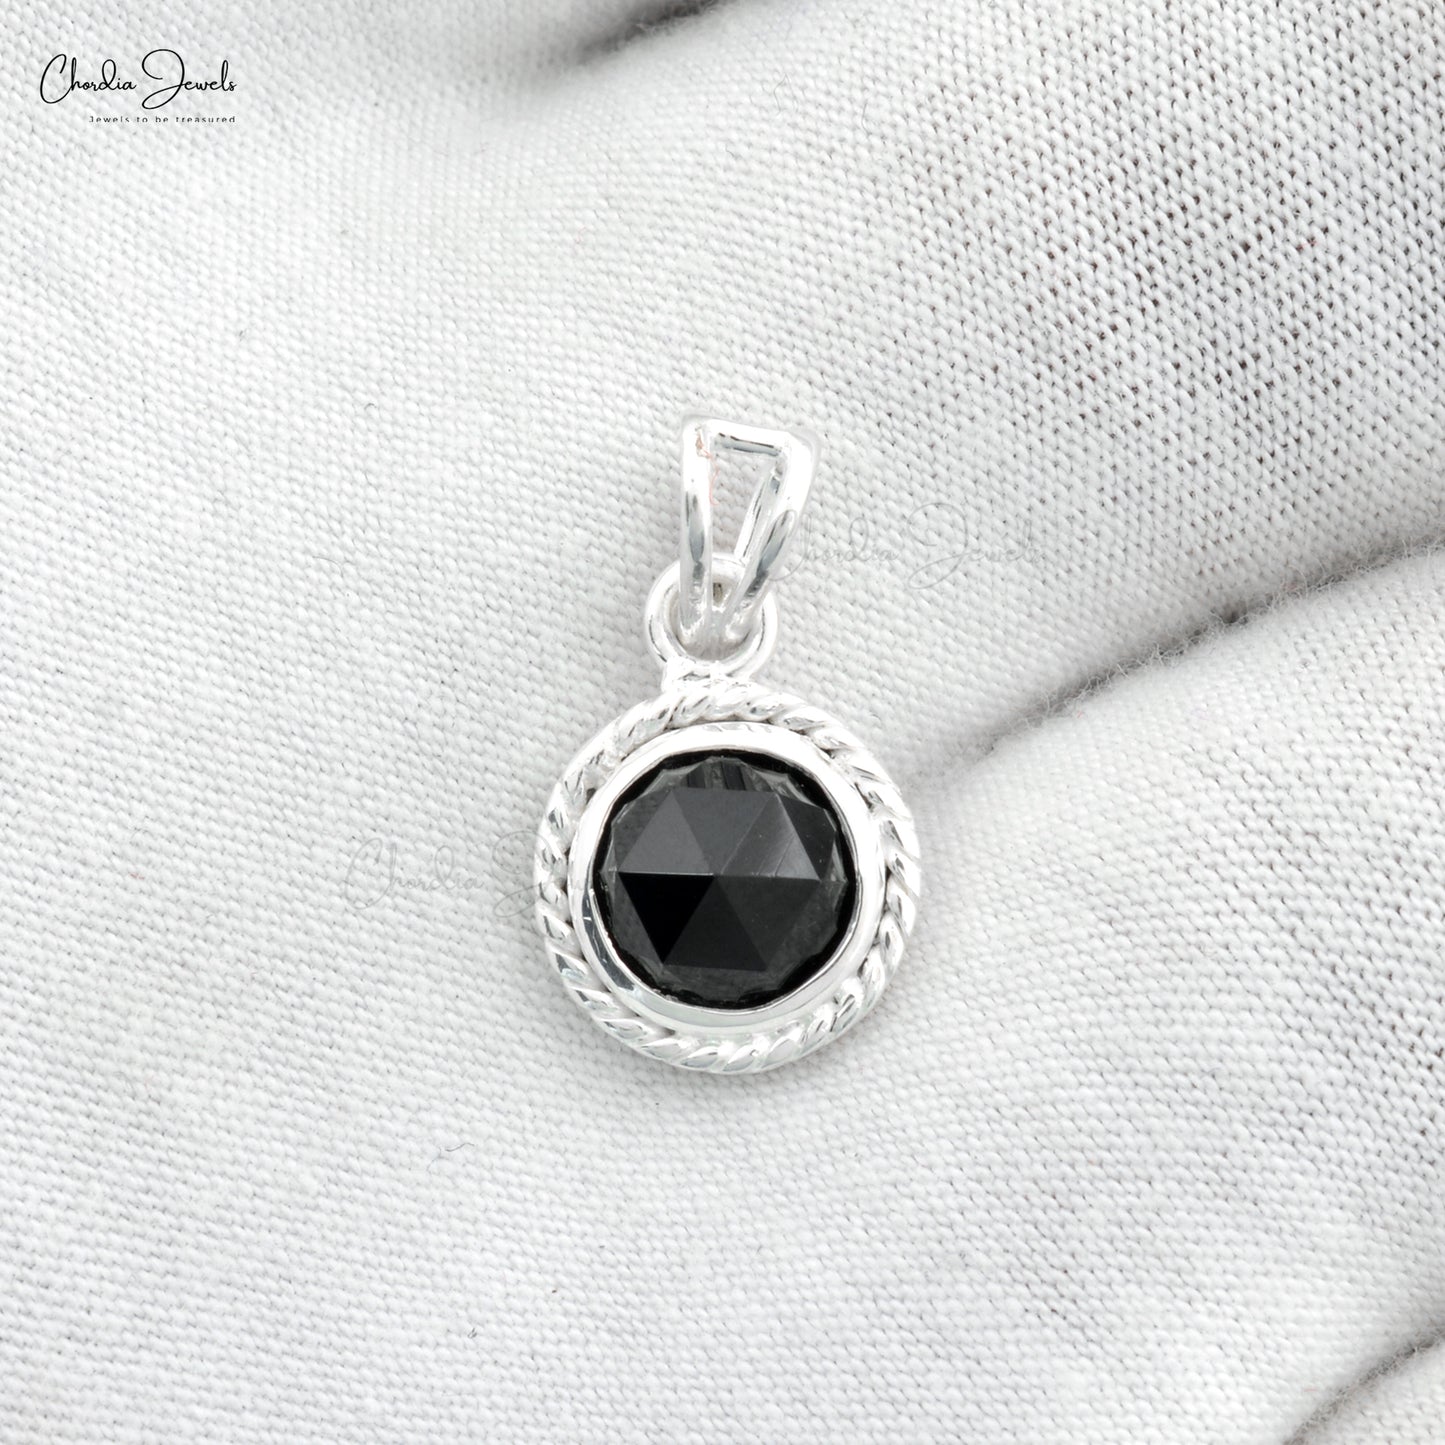 Top Quality Black Onyx Pendant in 925 Sterling Silver Round Cabochon Gemstone Jewelry At Affordable Price